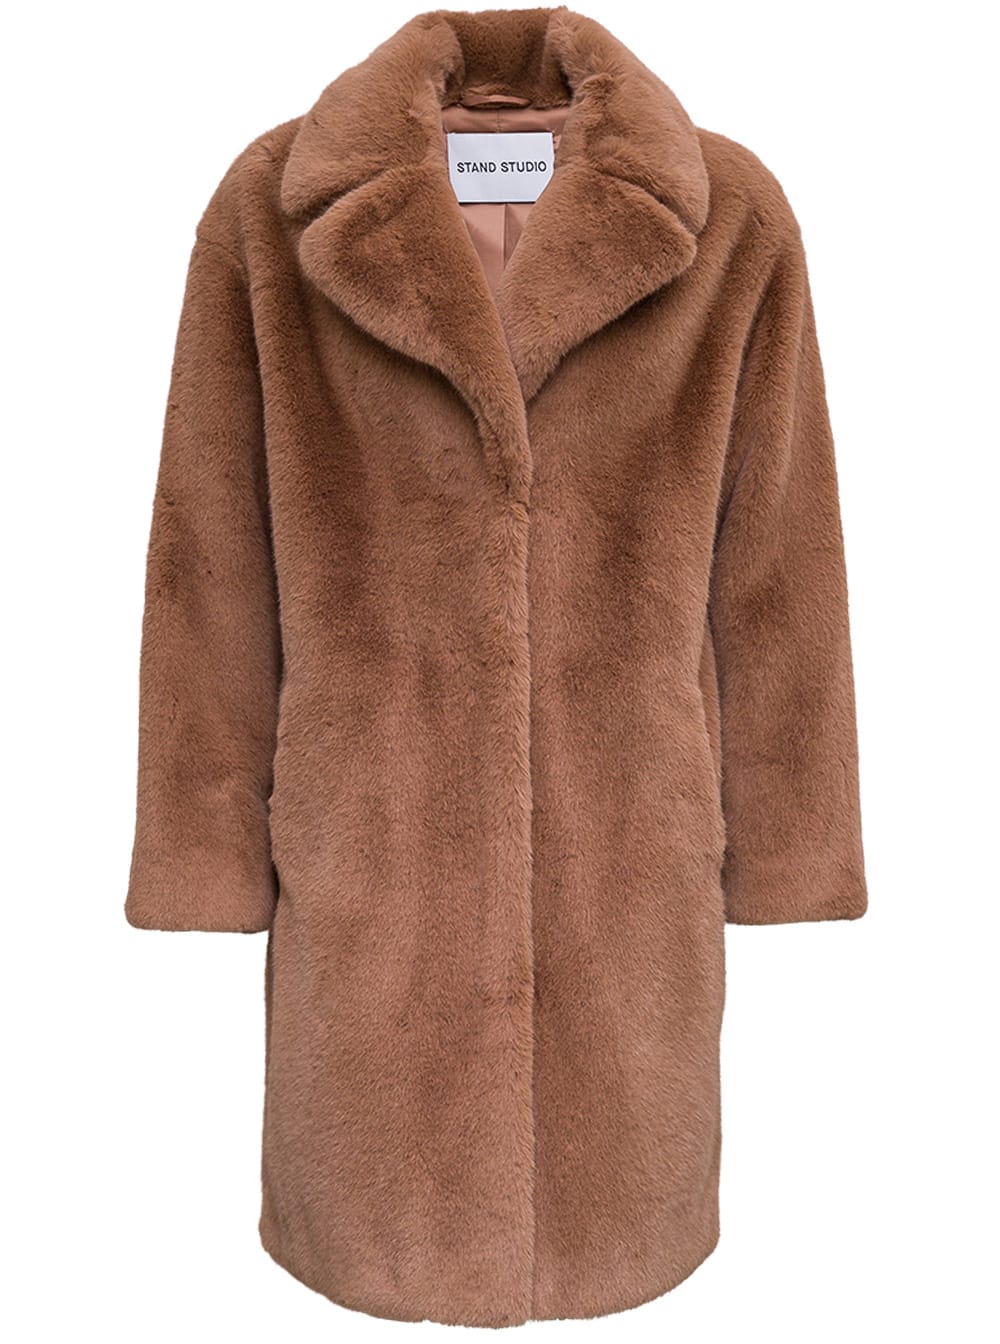 STAND STUDIO Camille Brown Teddy Coat